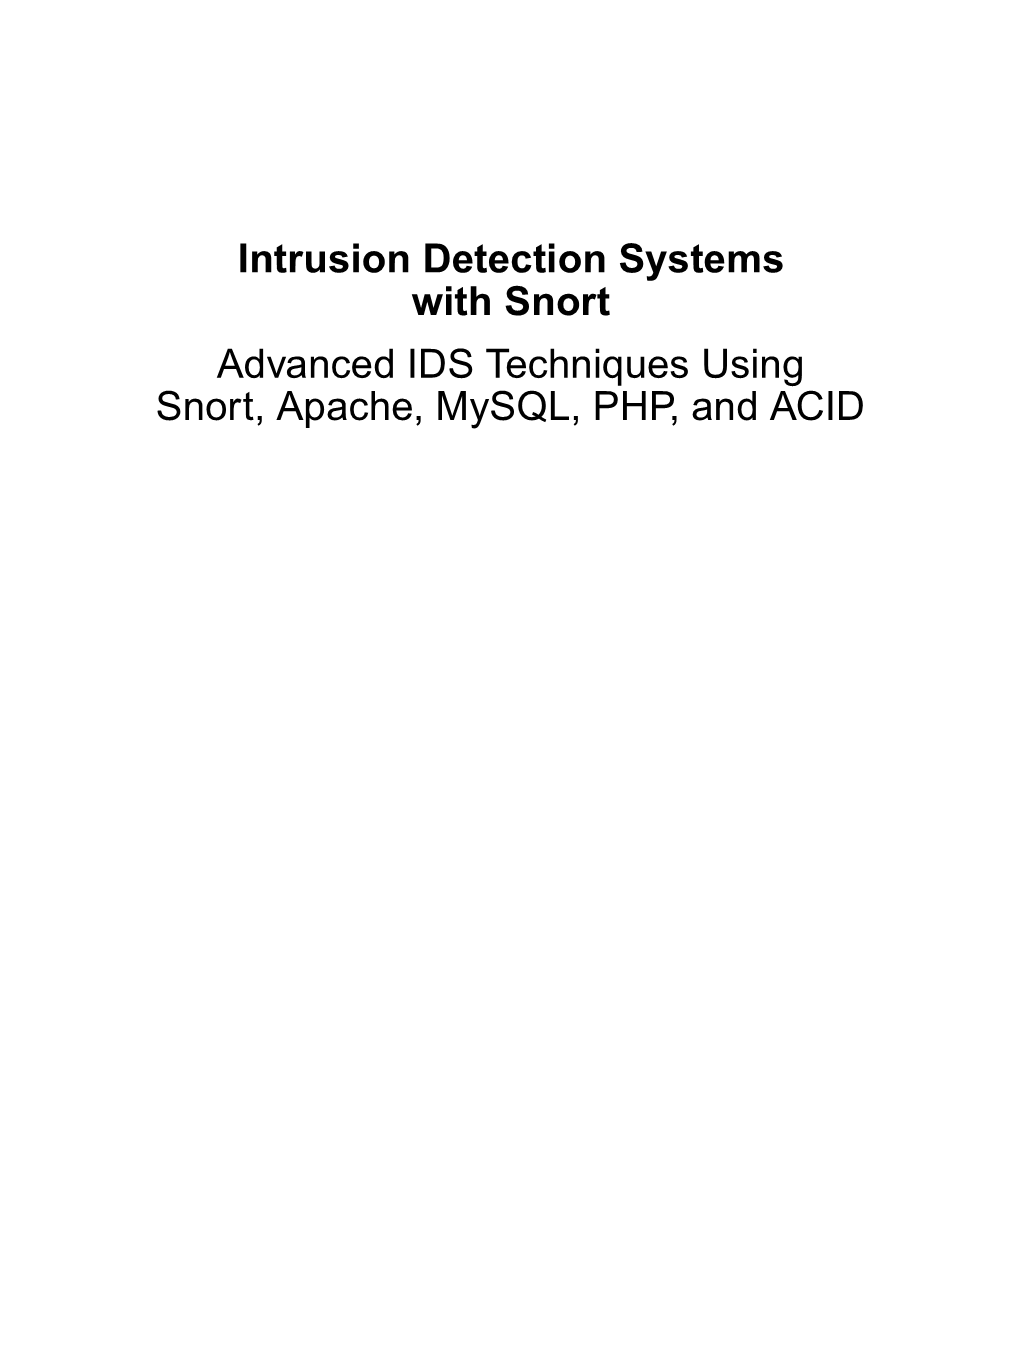 Intrusion Detection Systems with Snort Advanced IDS Techniques Using Snort, Apache, Mysql, PHP, and ACID